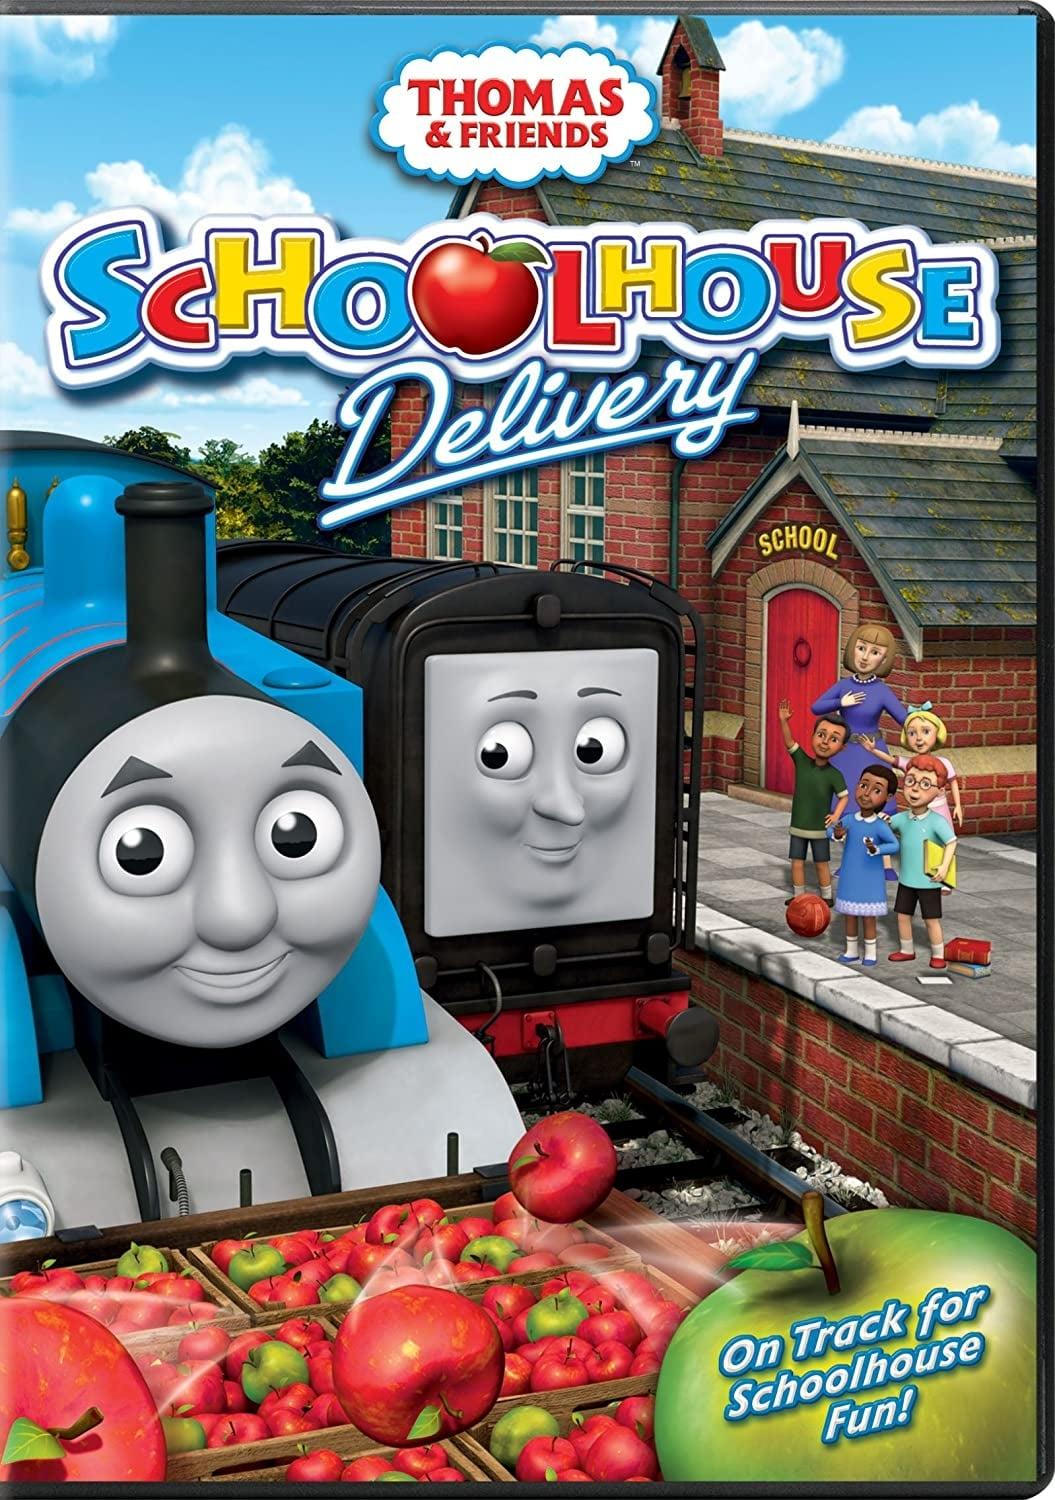 Thomas & Friends: Schoolhouse Delivery poster